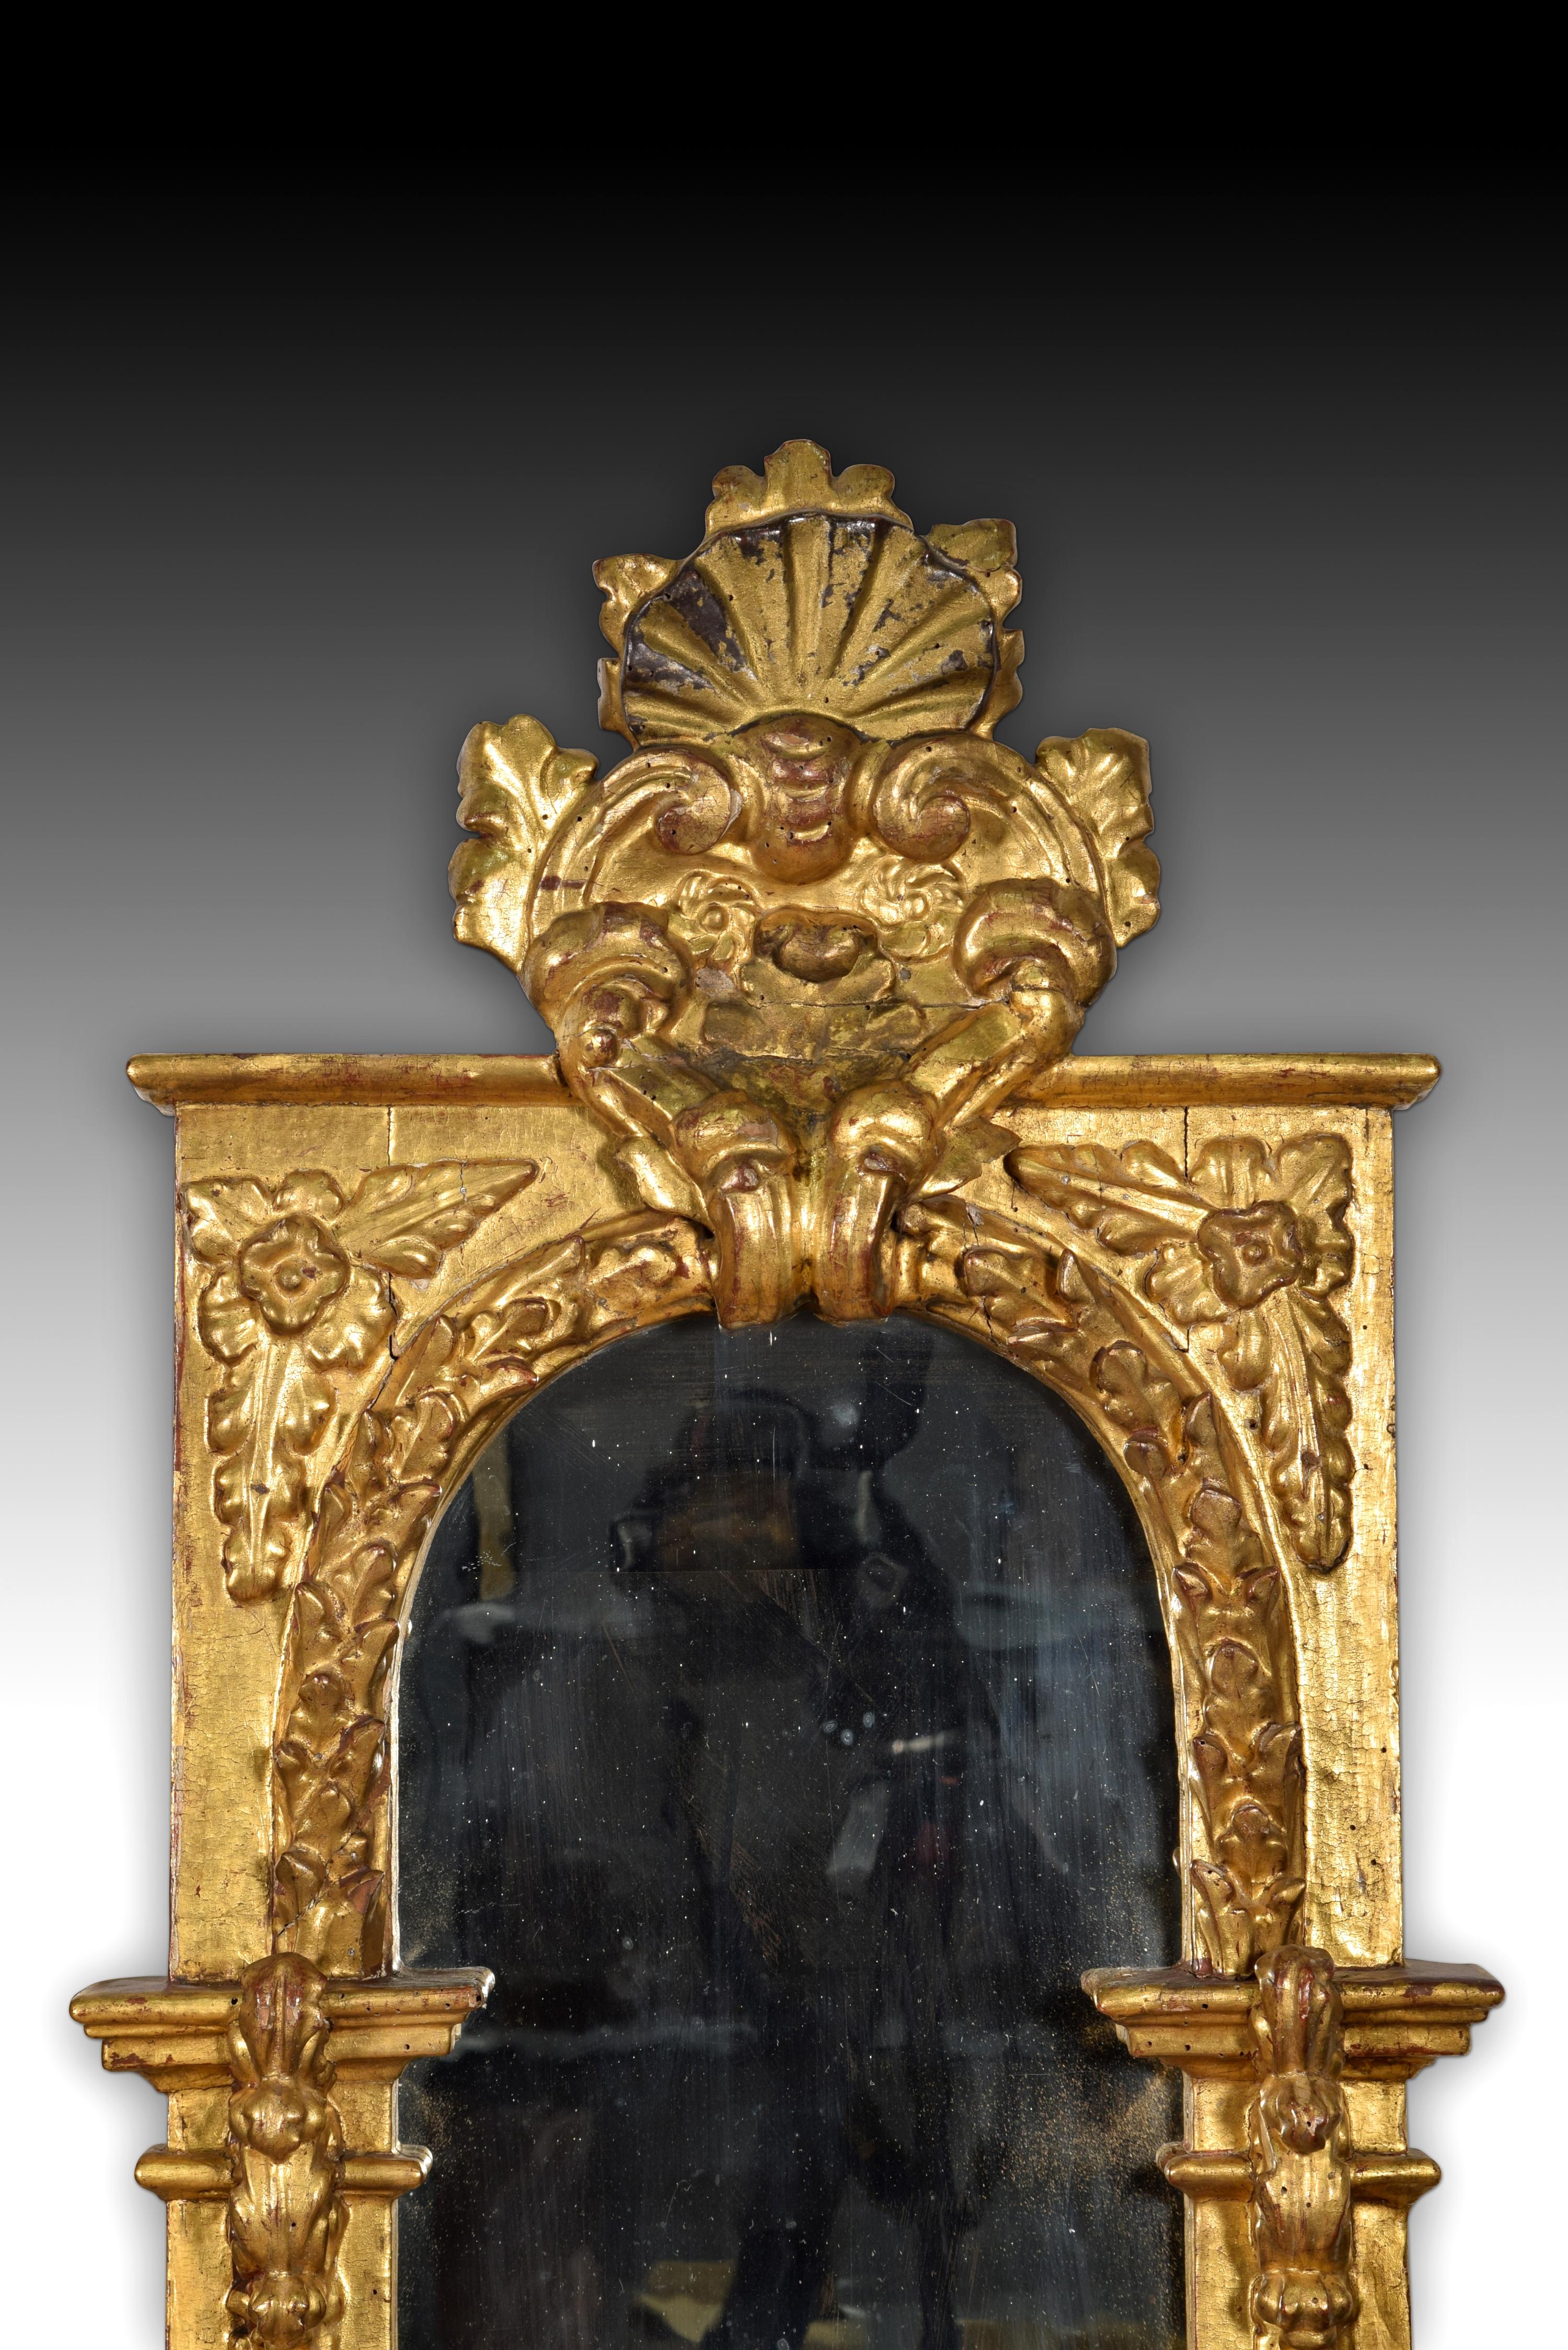 Pair of mirrors. Carved and gilded wood. Spanish school, 18th century.
 Pair of rectangular sheet mirrors with a semicircular arch top that have two carved and gilded wooden frames, very similar to each other. Both have a crest topped with a